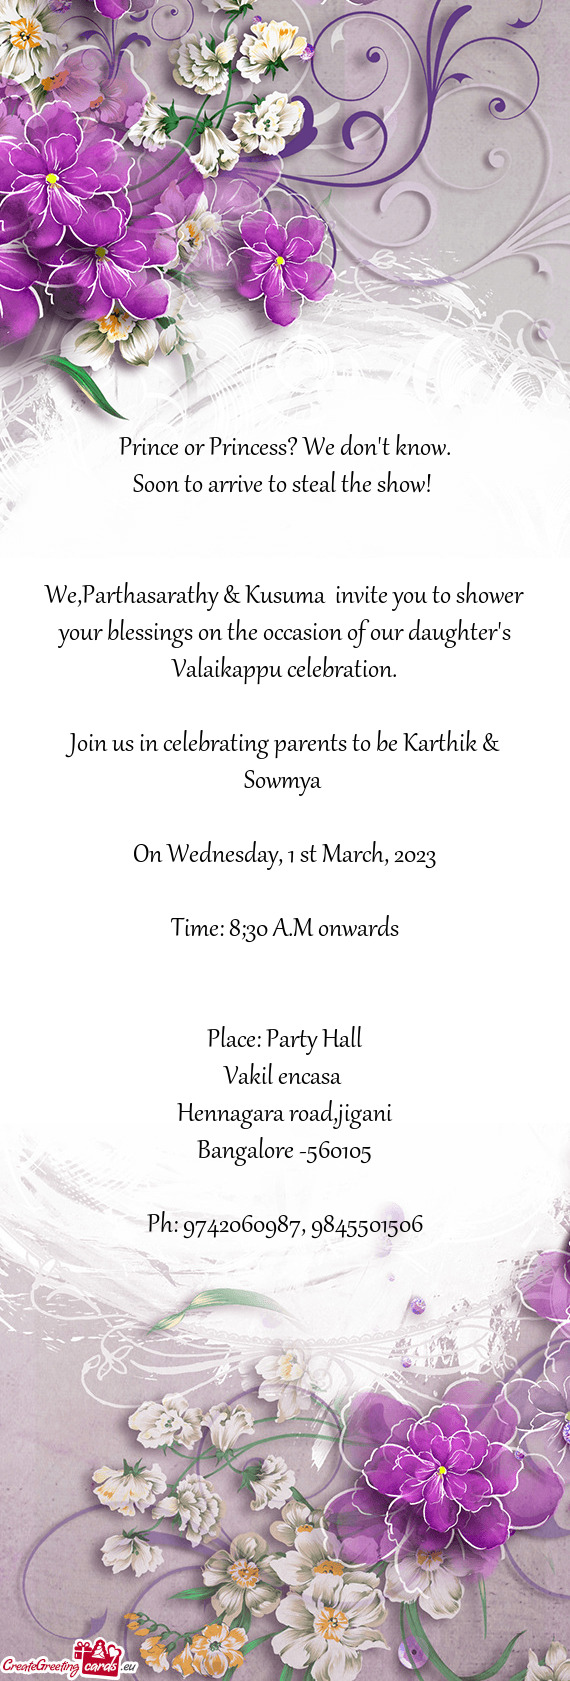 We,Parthasarathy & Kusuma invite you to shower your blessings on the occasion of our daughter